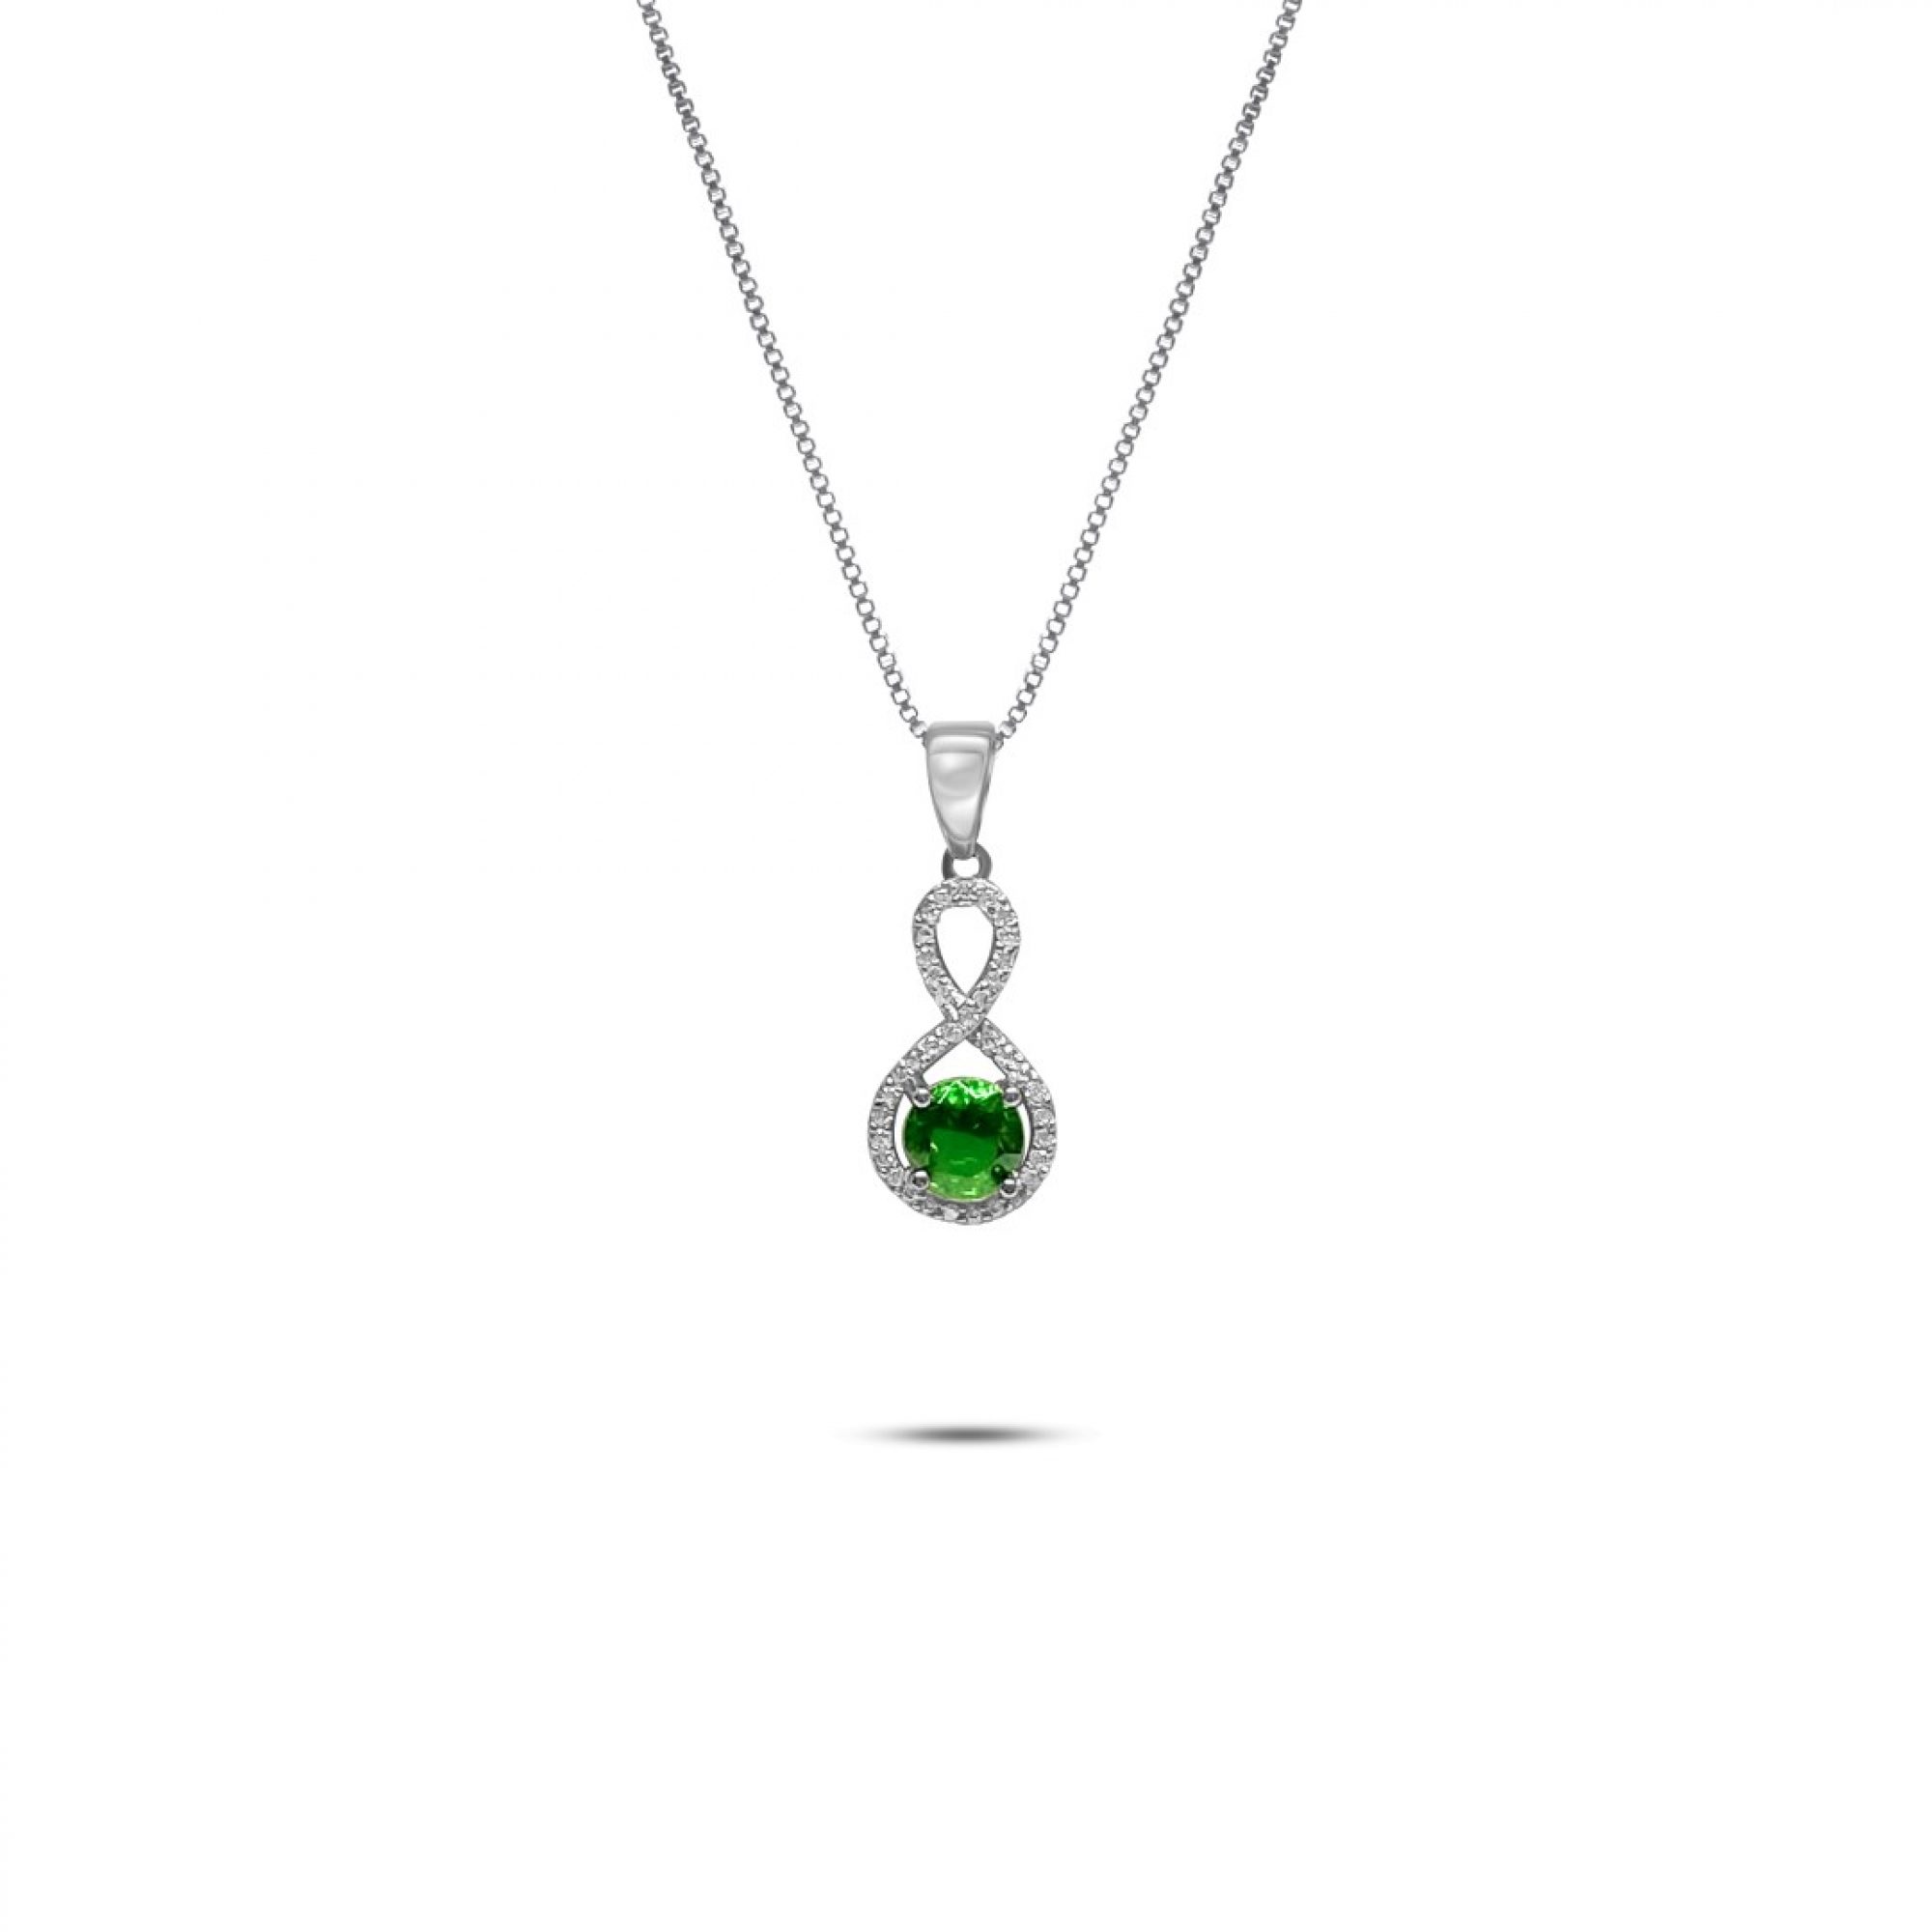 Necklace with emerald and zircon stones